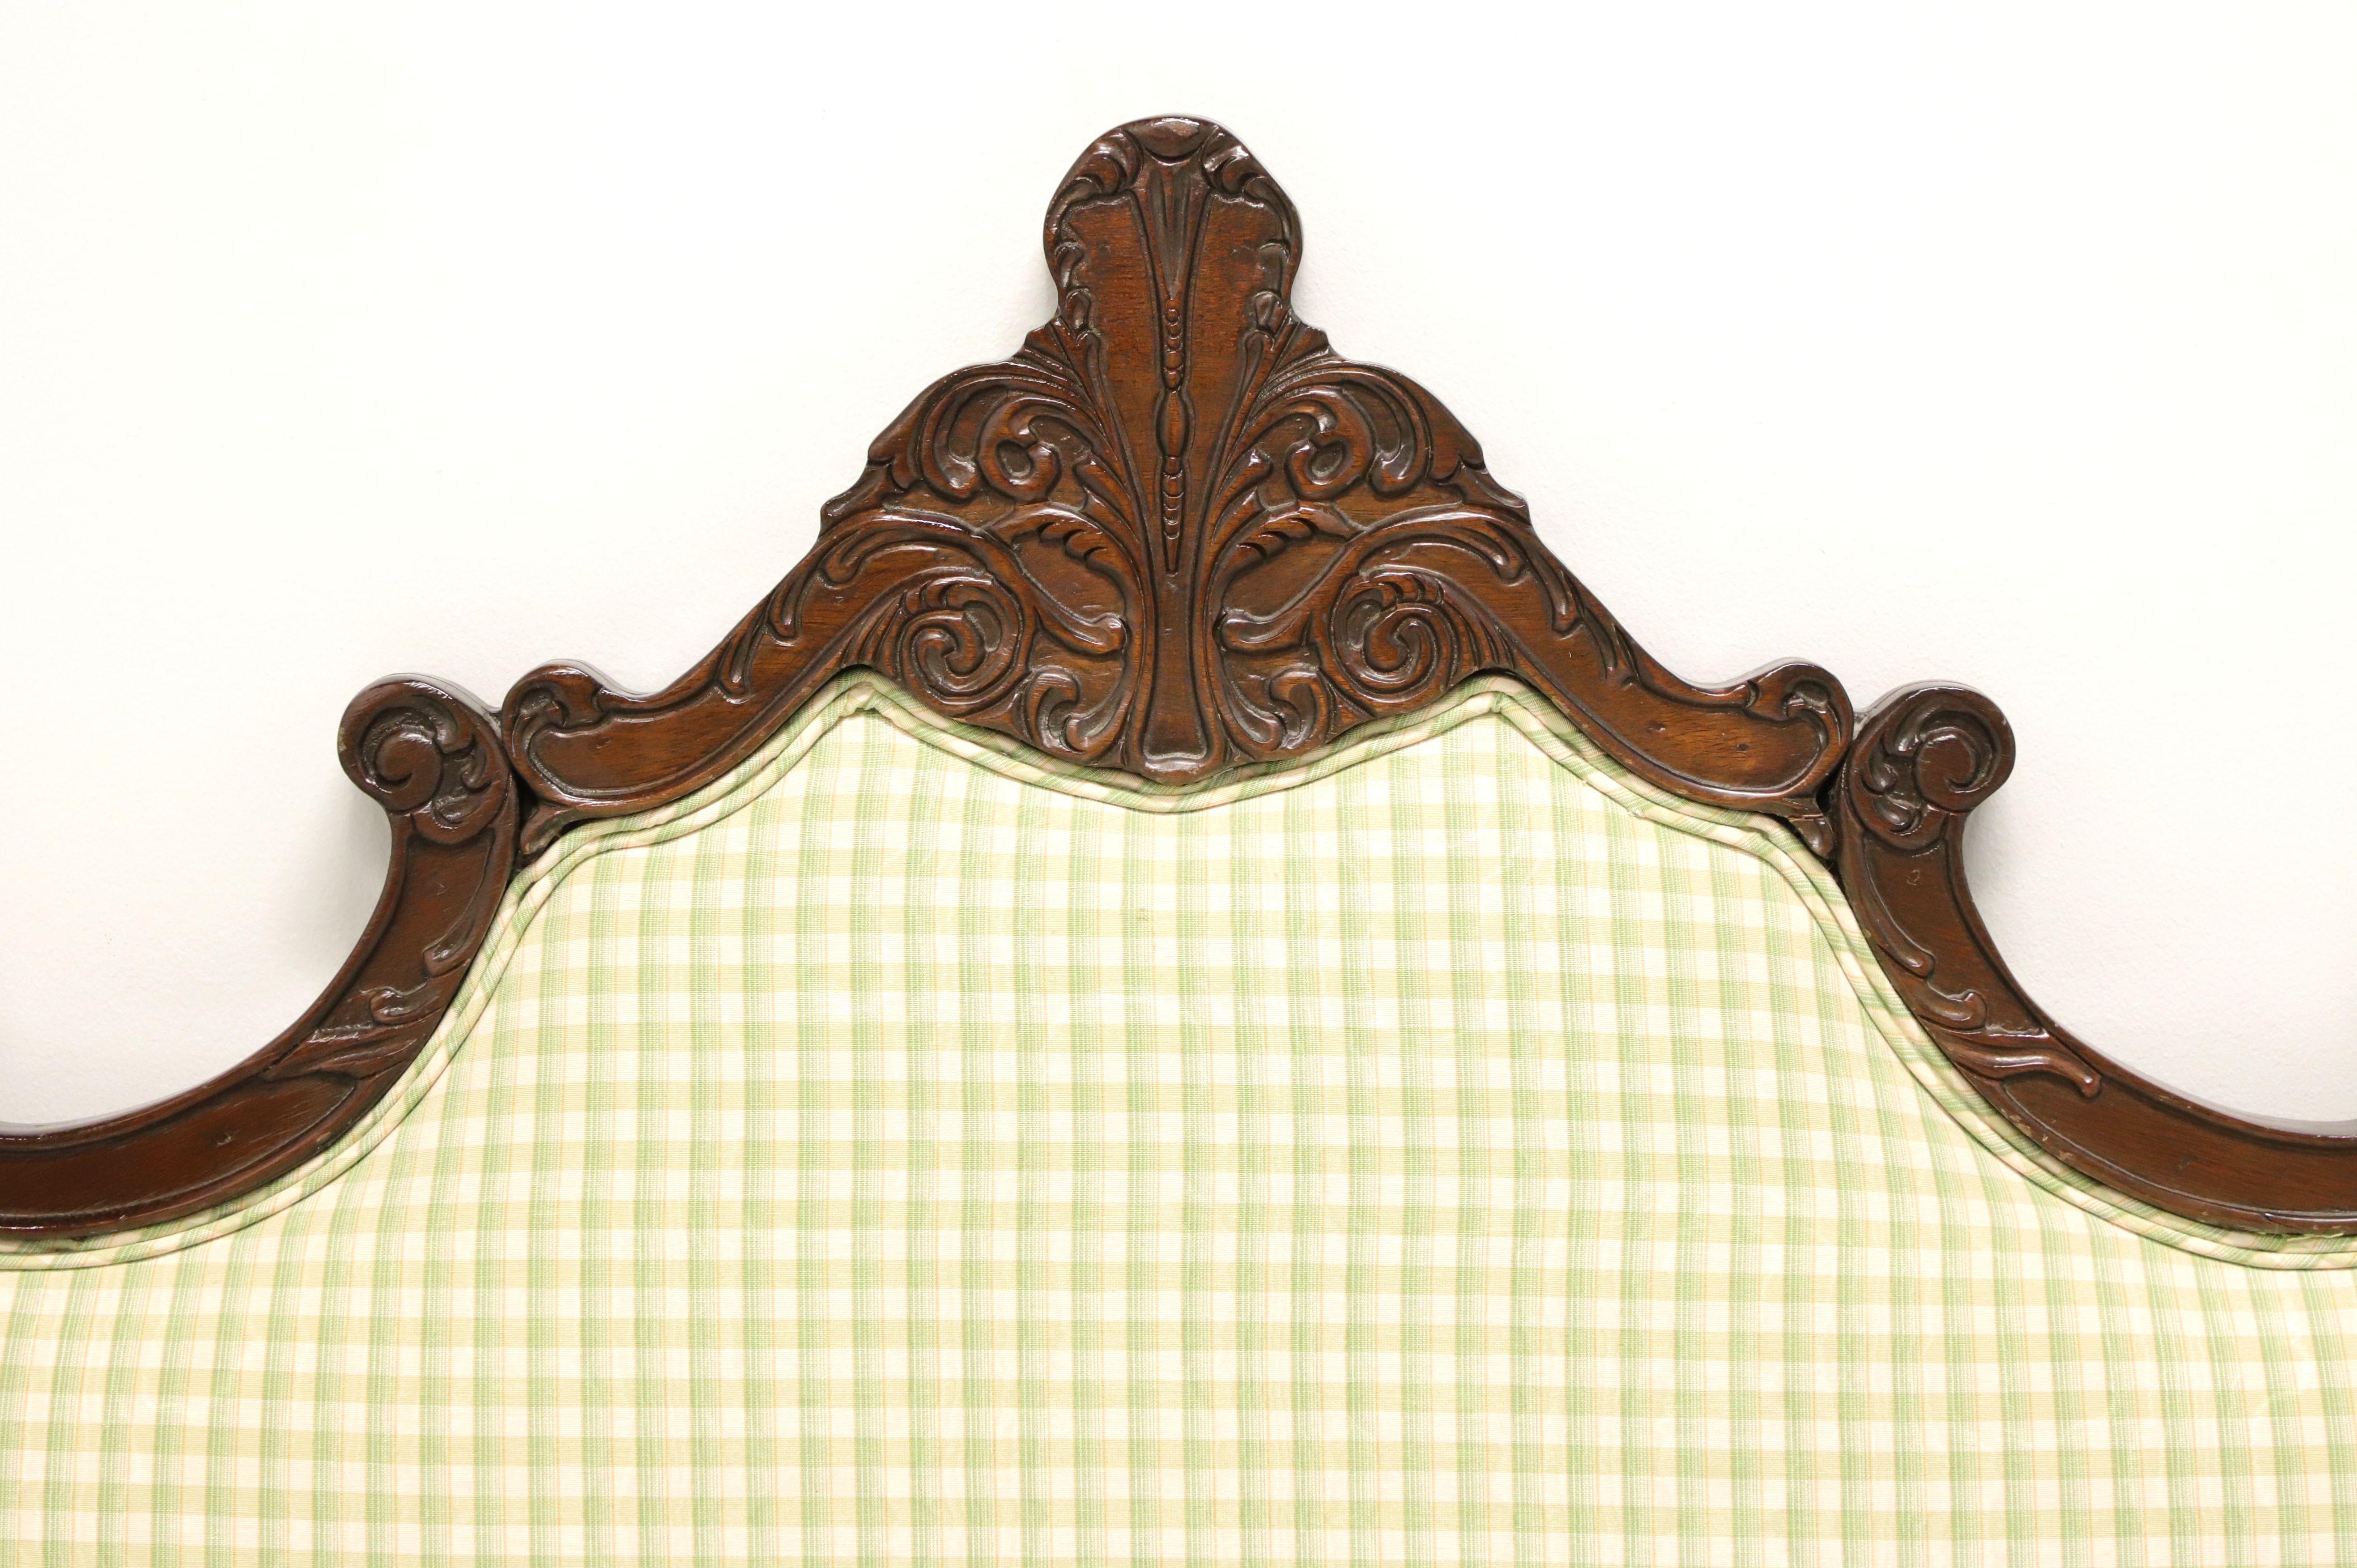 A French Country style king size upholstered headboard, unbranded, comparable quality to Drexel or similar. Decoratively carved arced walnut frame with soft mint green checked pattern upholstery. Made in the USA, in the mid 20th